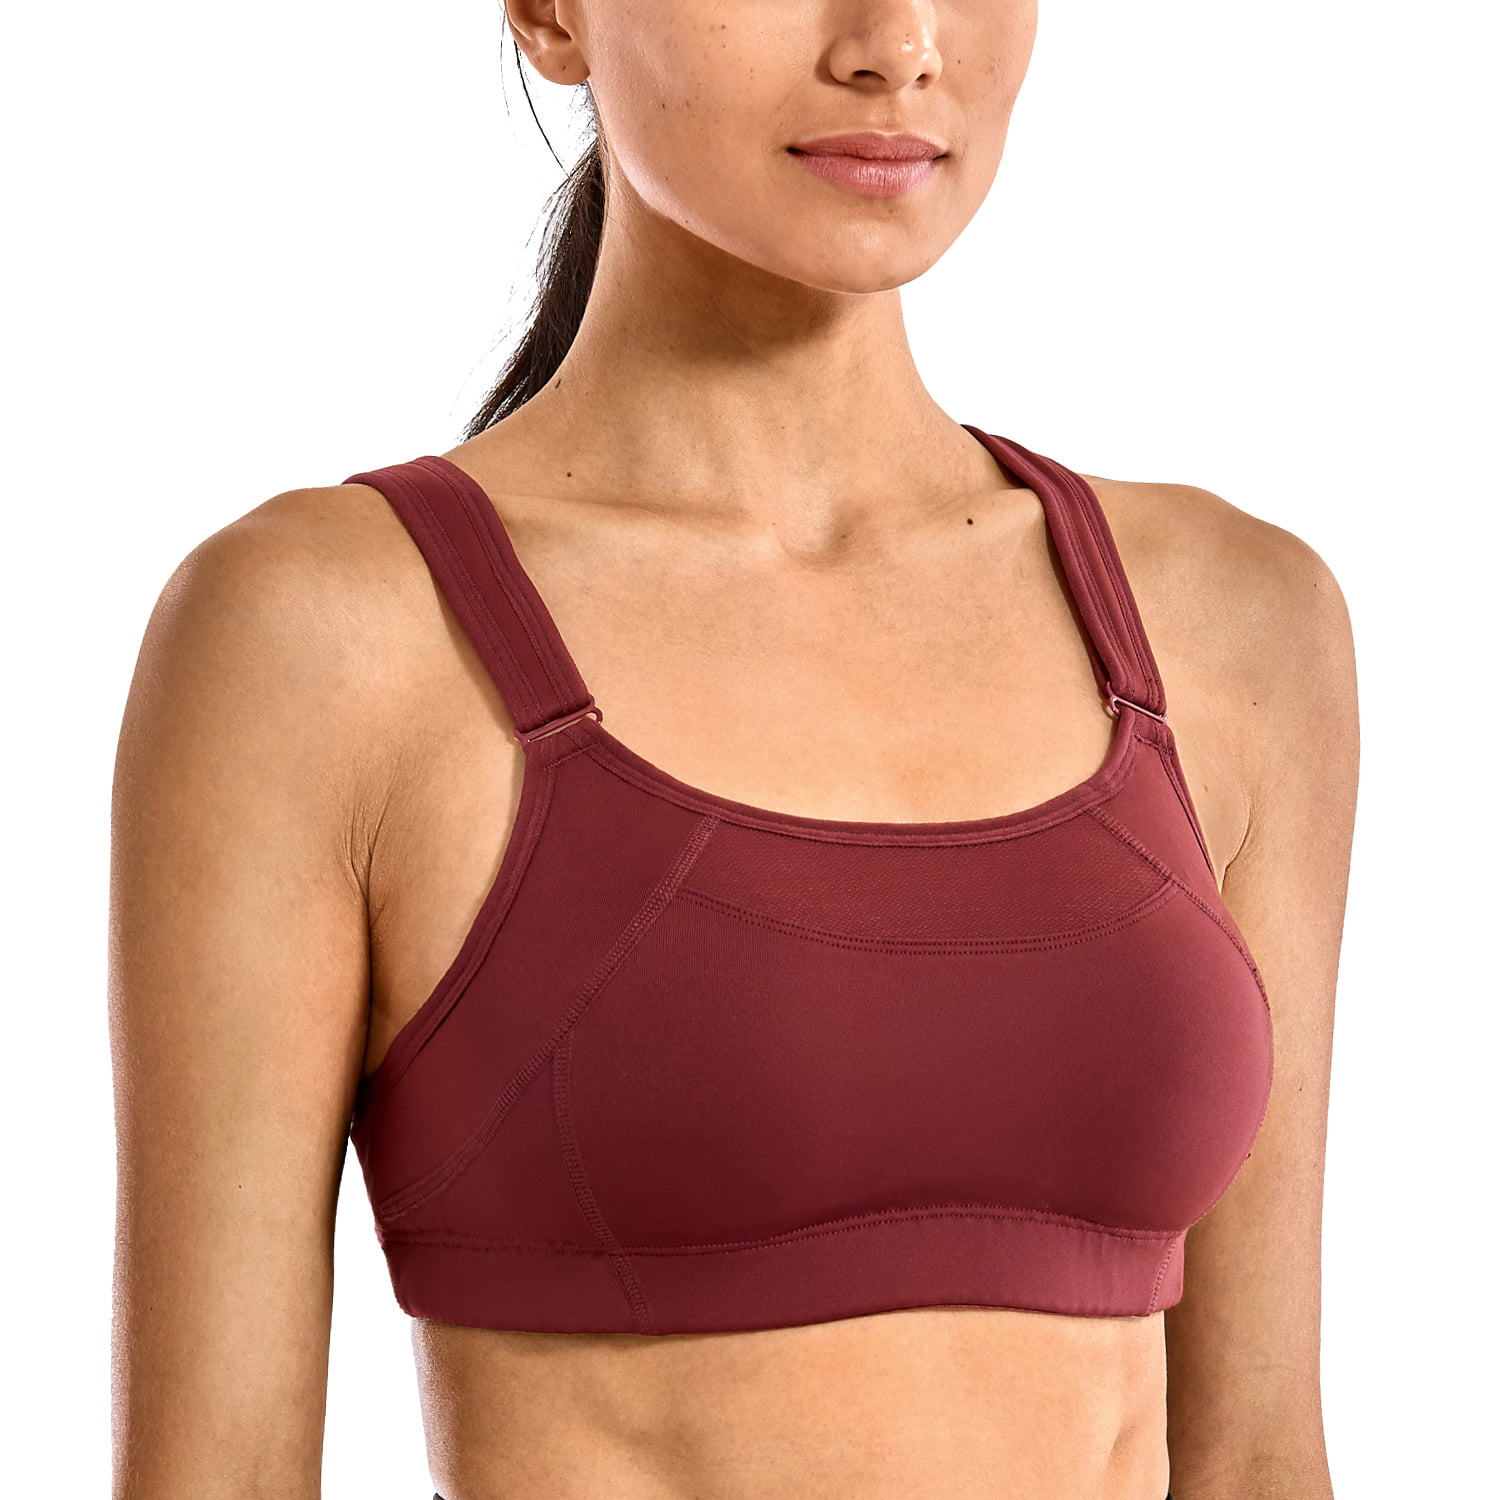 SYROKAN Womens Front Adjustable Wirefree High Impact Full Support Sports Bra 